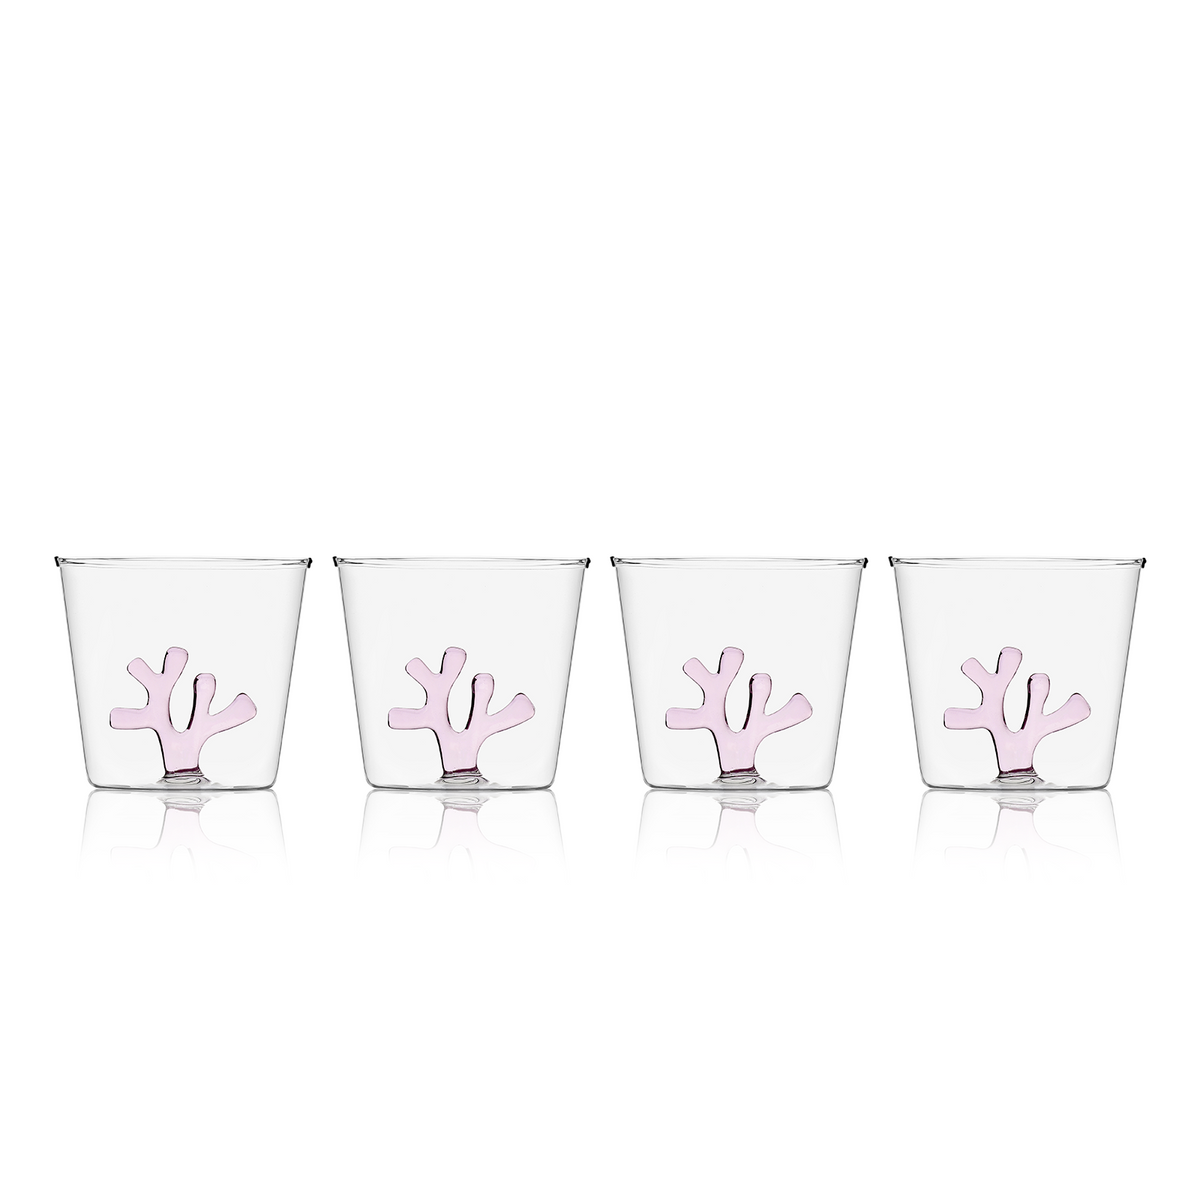 Sprezz Whimsical Tumbler Glasses Blush Pink | Colored Glassware Set of Four.  Collection of all-purpose coloured glassware featuring a blush pink coral on the inside.